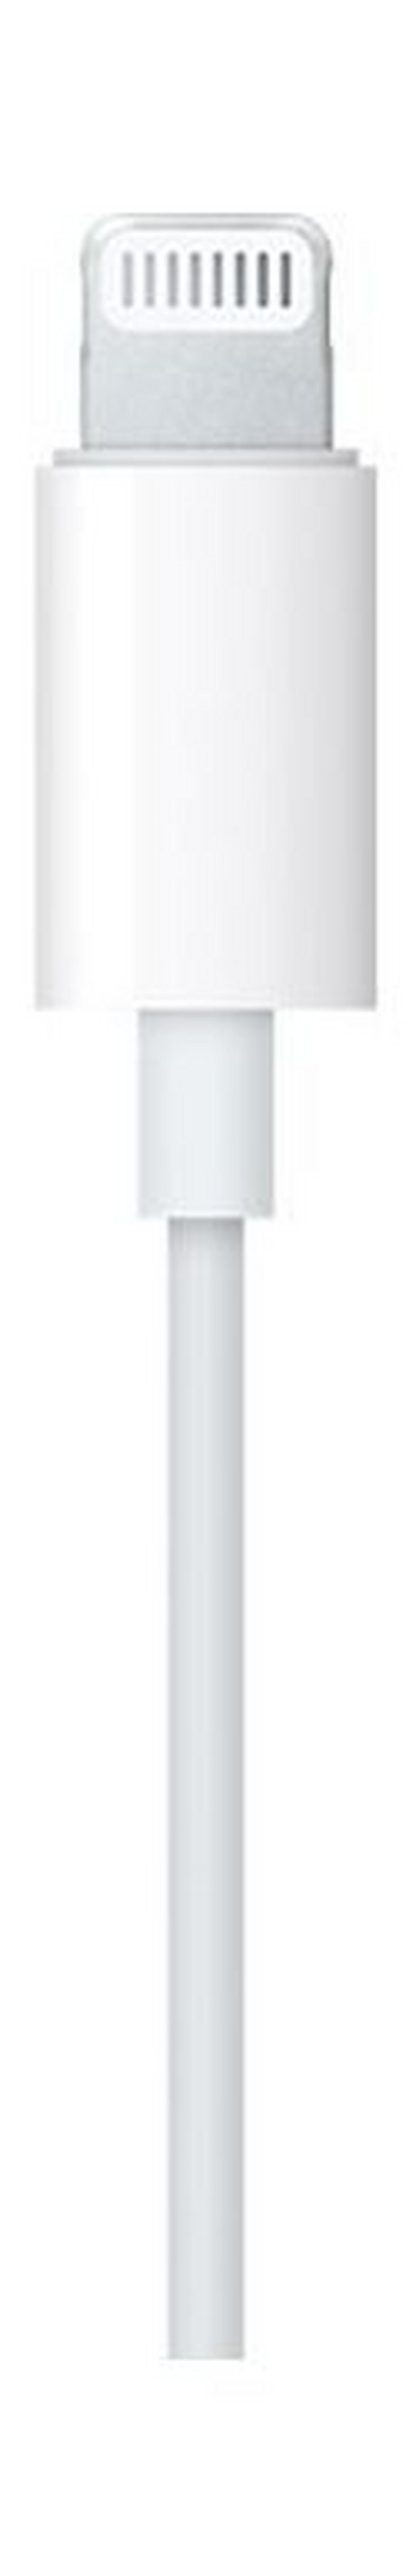 Apple EarPods with Lightning Connector, MMTN2ZM/A - White